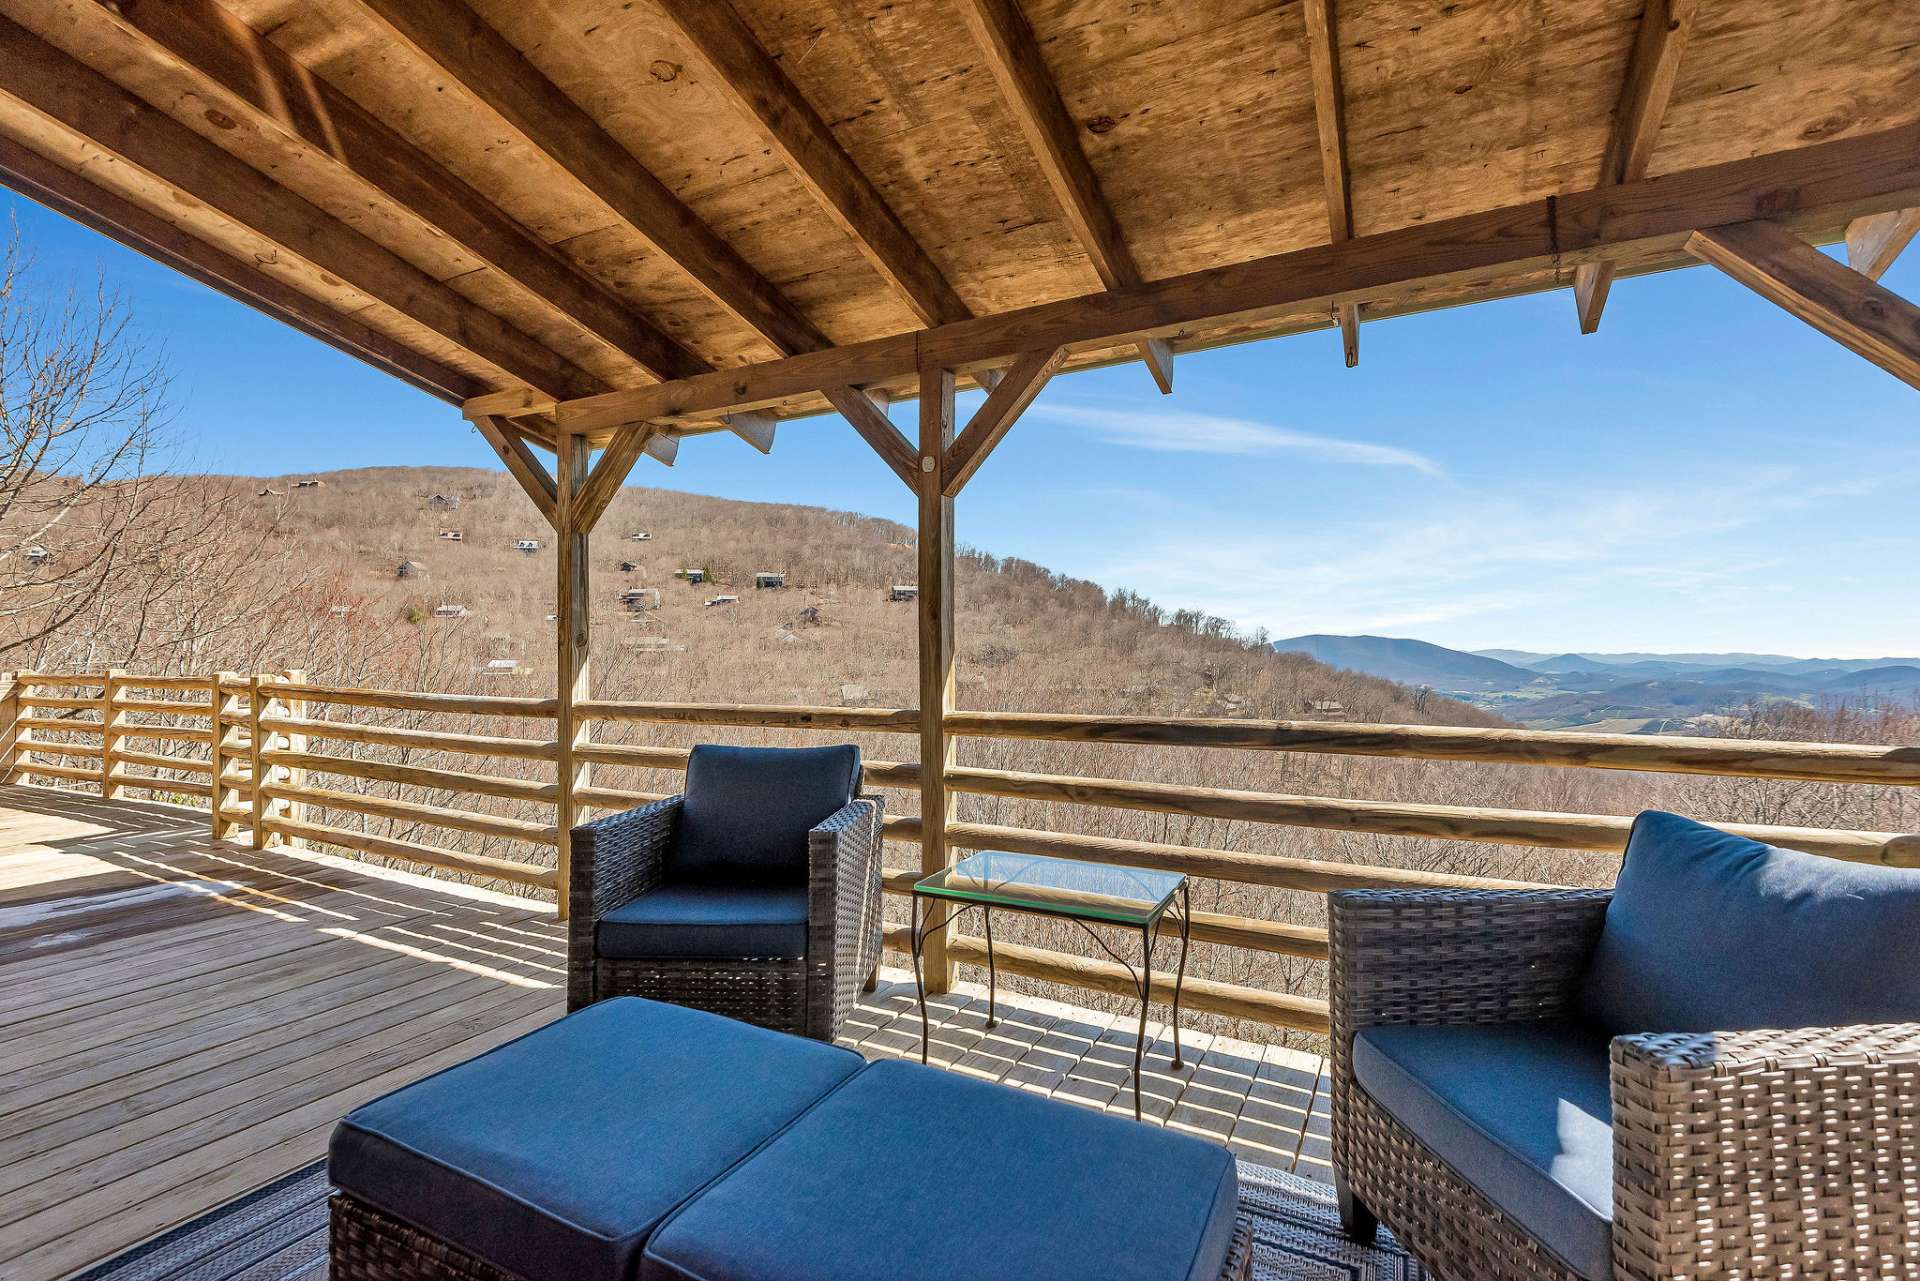 An ideal setting for entertaining amidst the natural beauty and open sky.